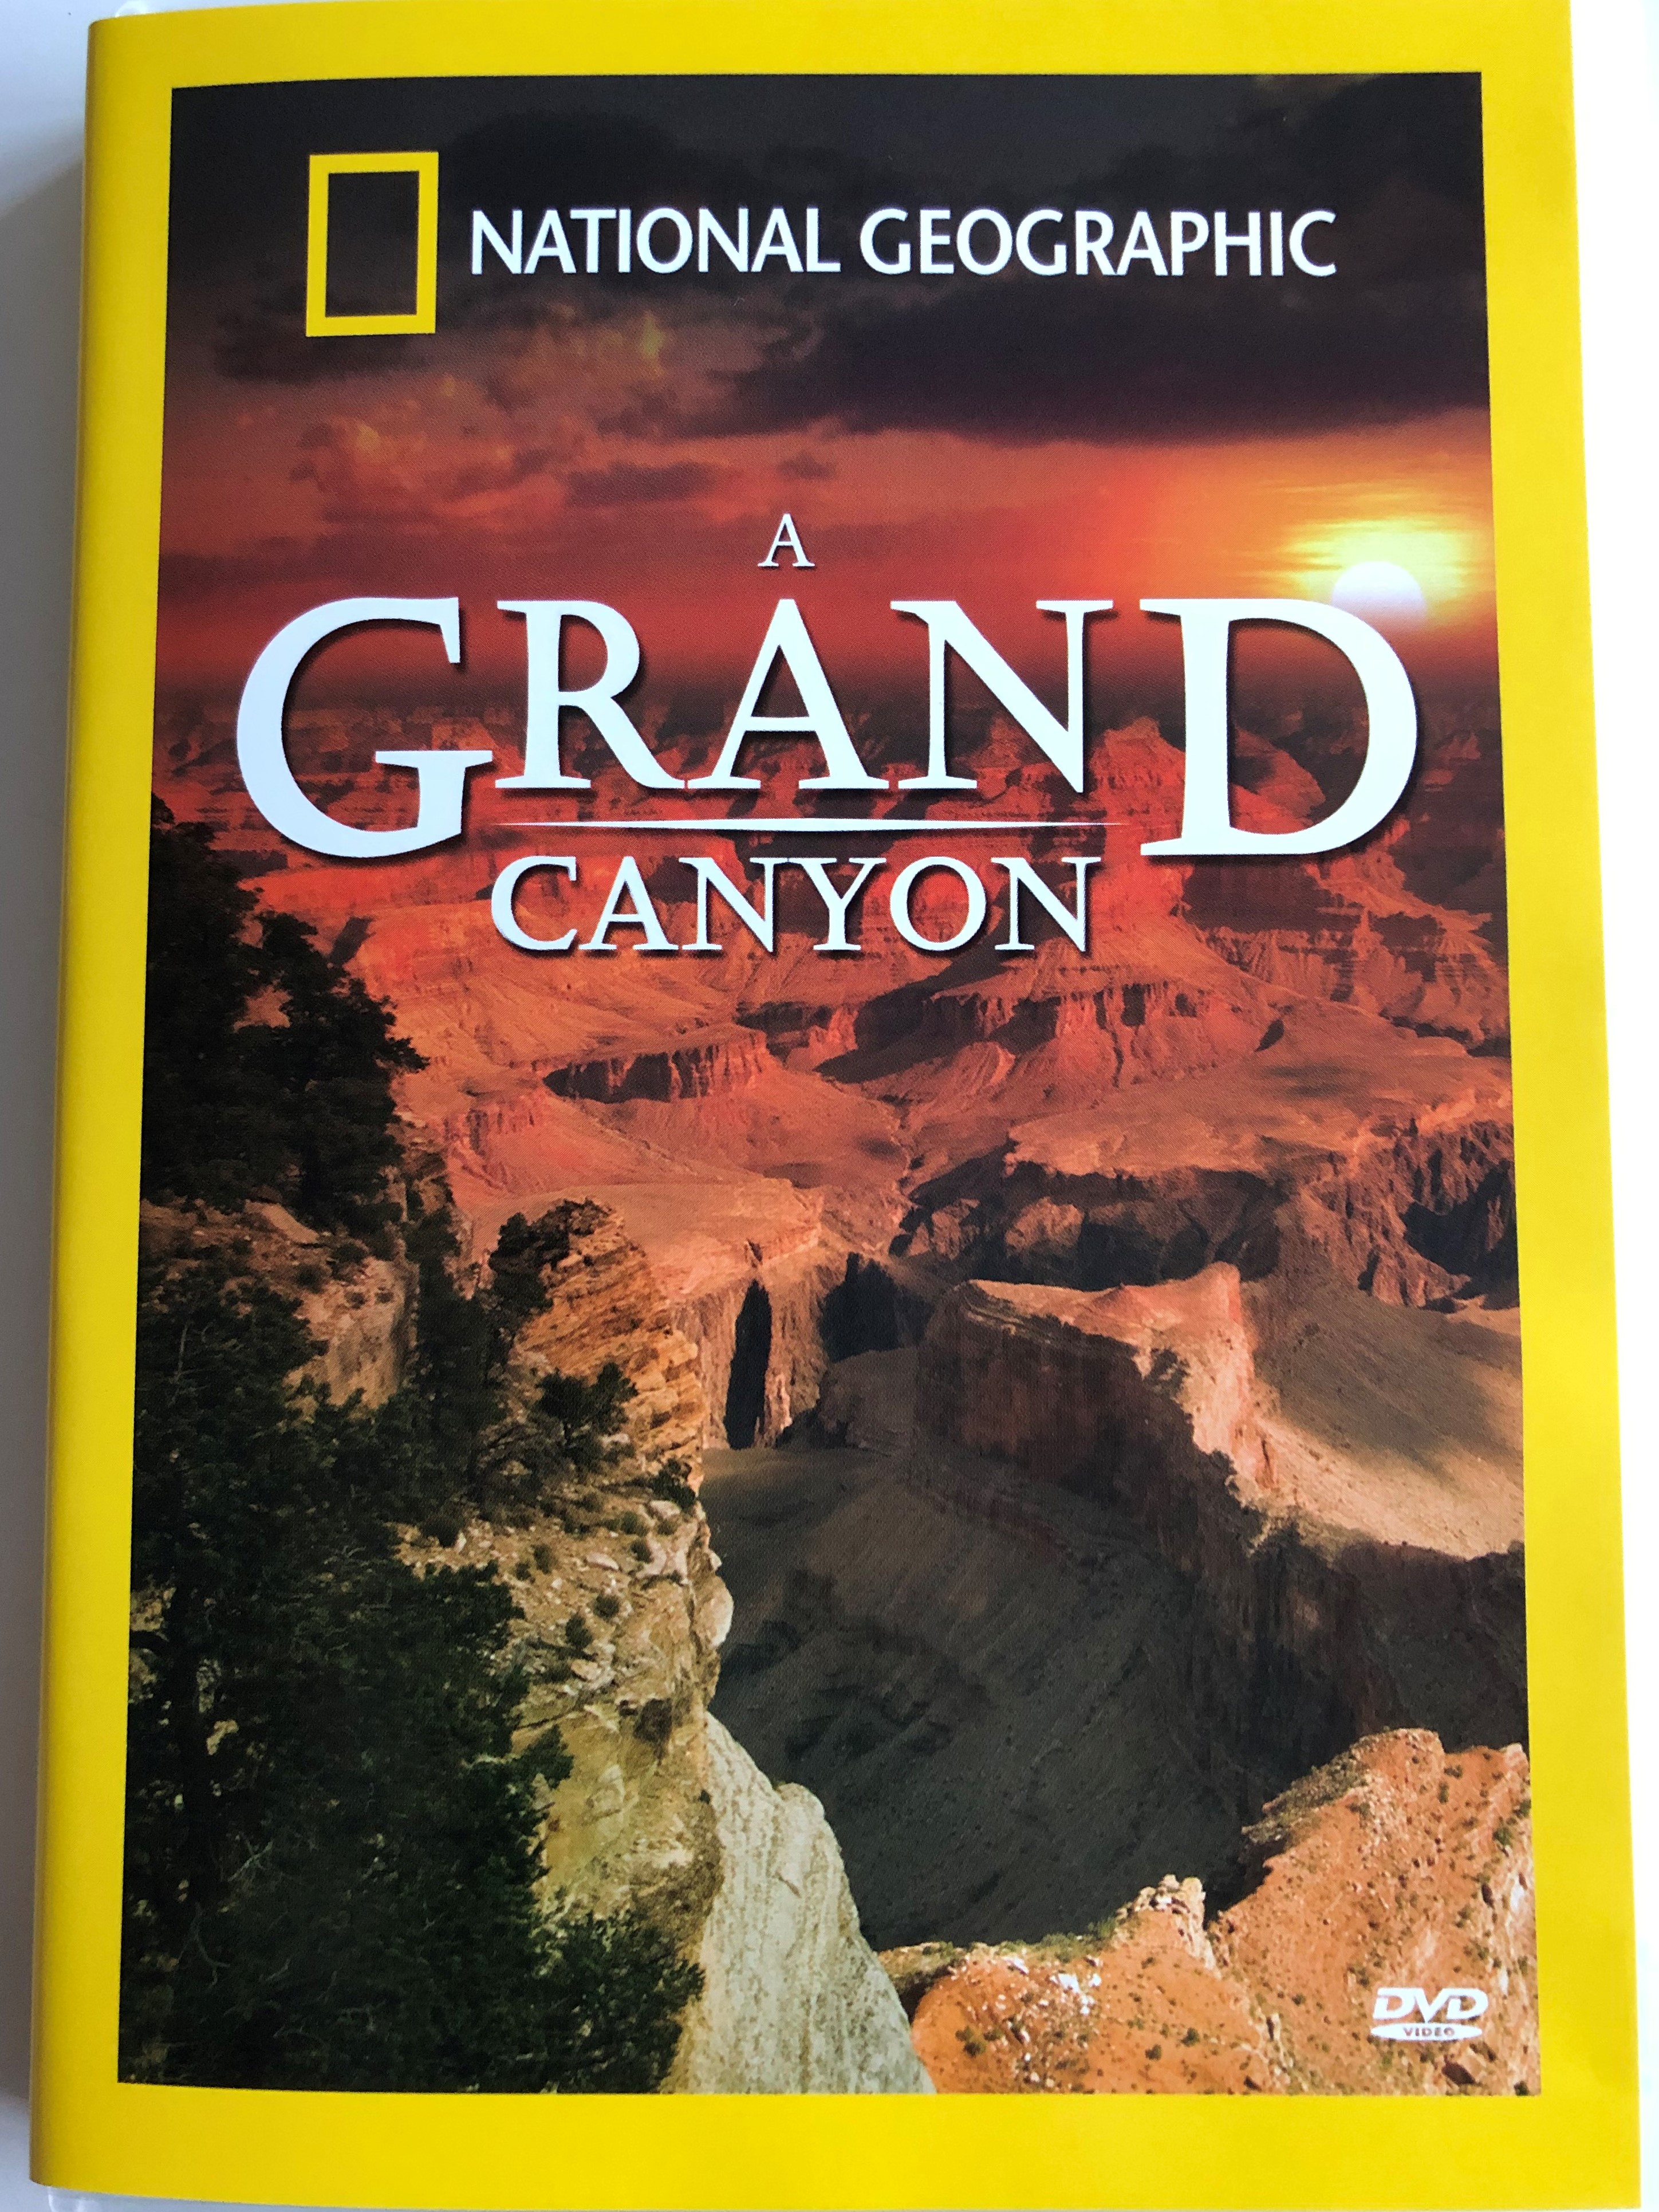 grand-canyon-dvd-2008-a-grand-canyon-national-geographic-documentary-1-.jpg